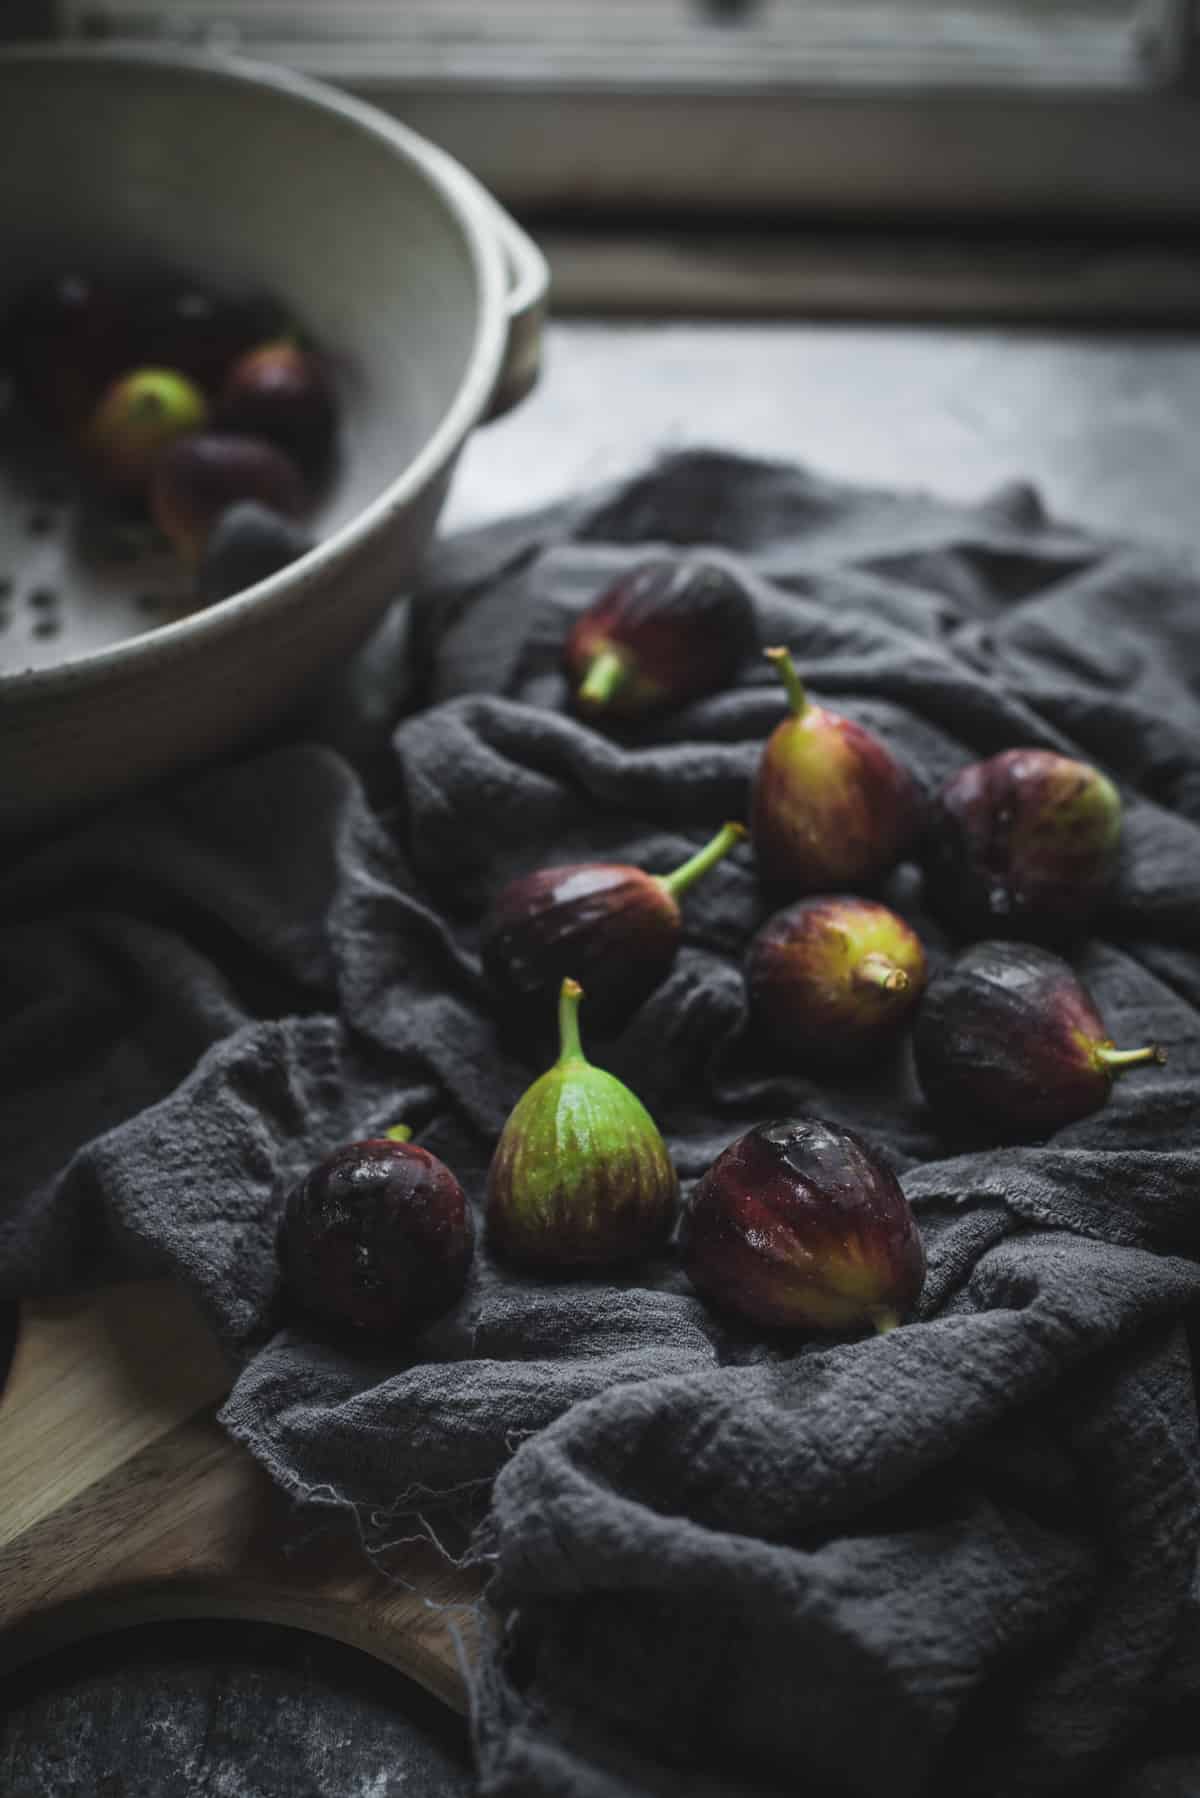 washed figs on a grey napkin